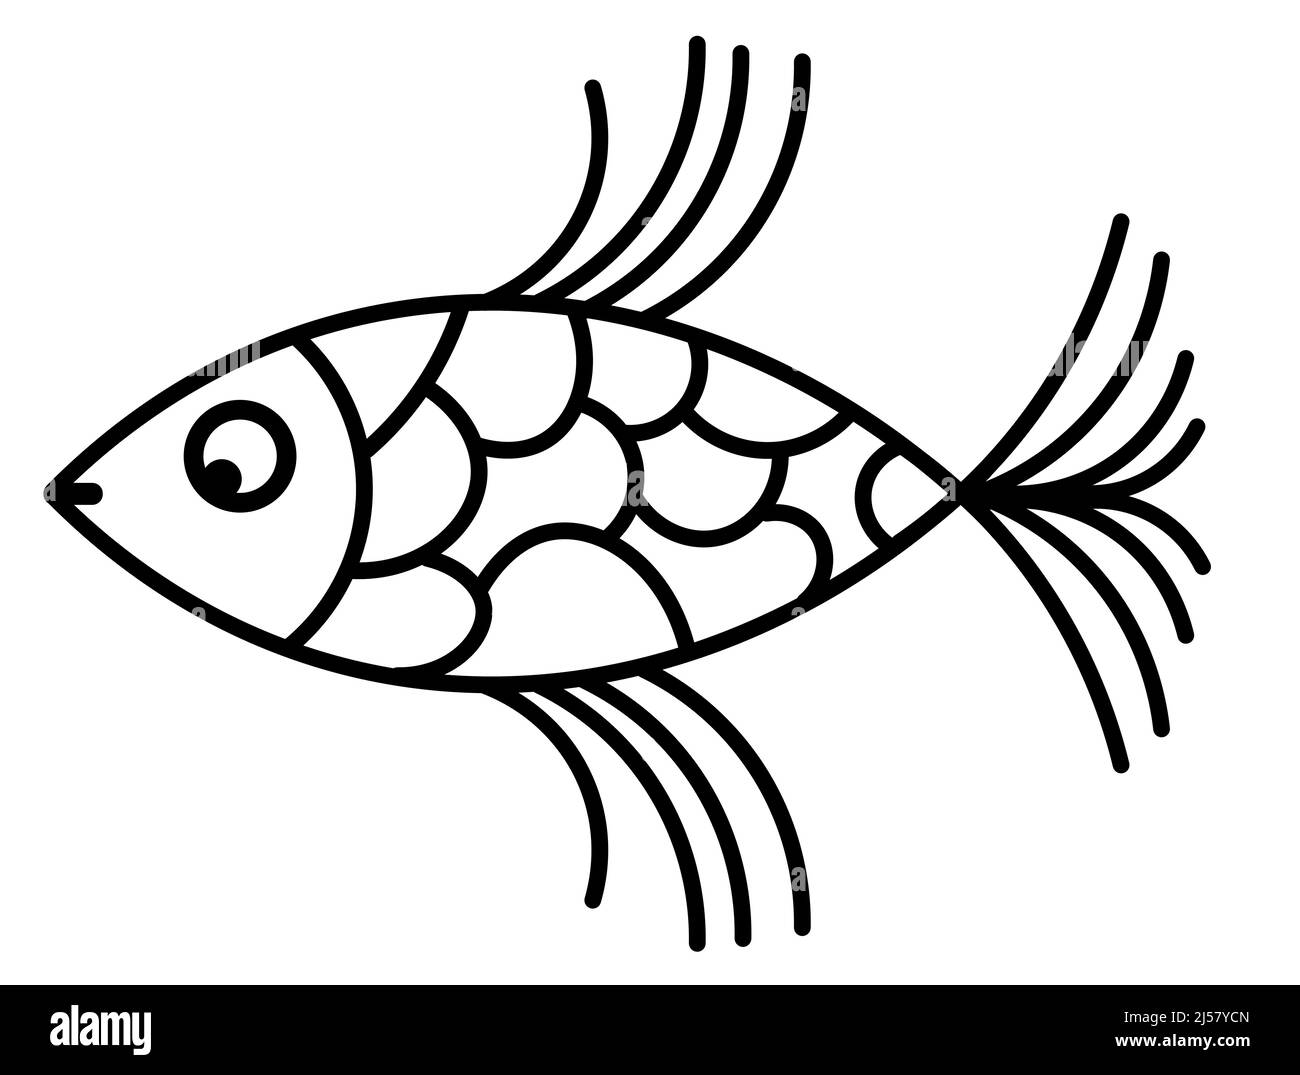 Clip art fish Black and White Stock Photos & Images - Alamy